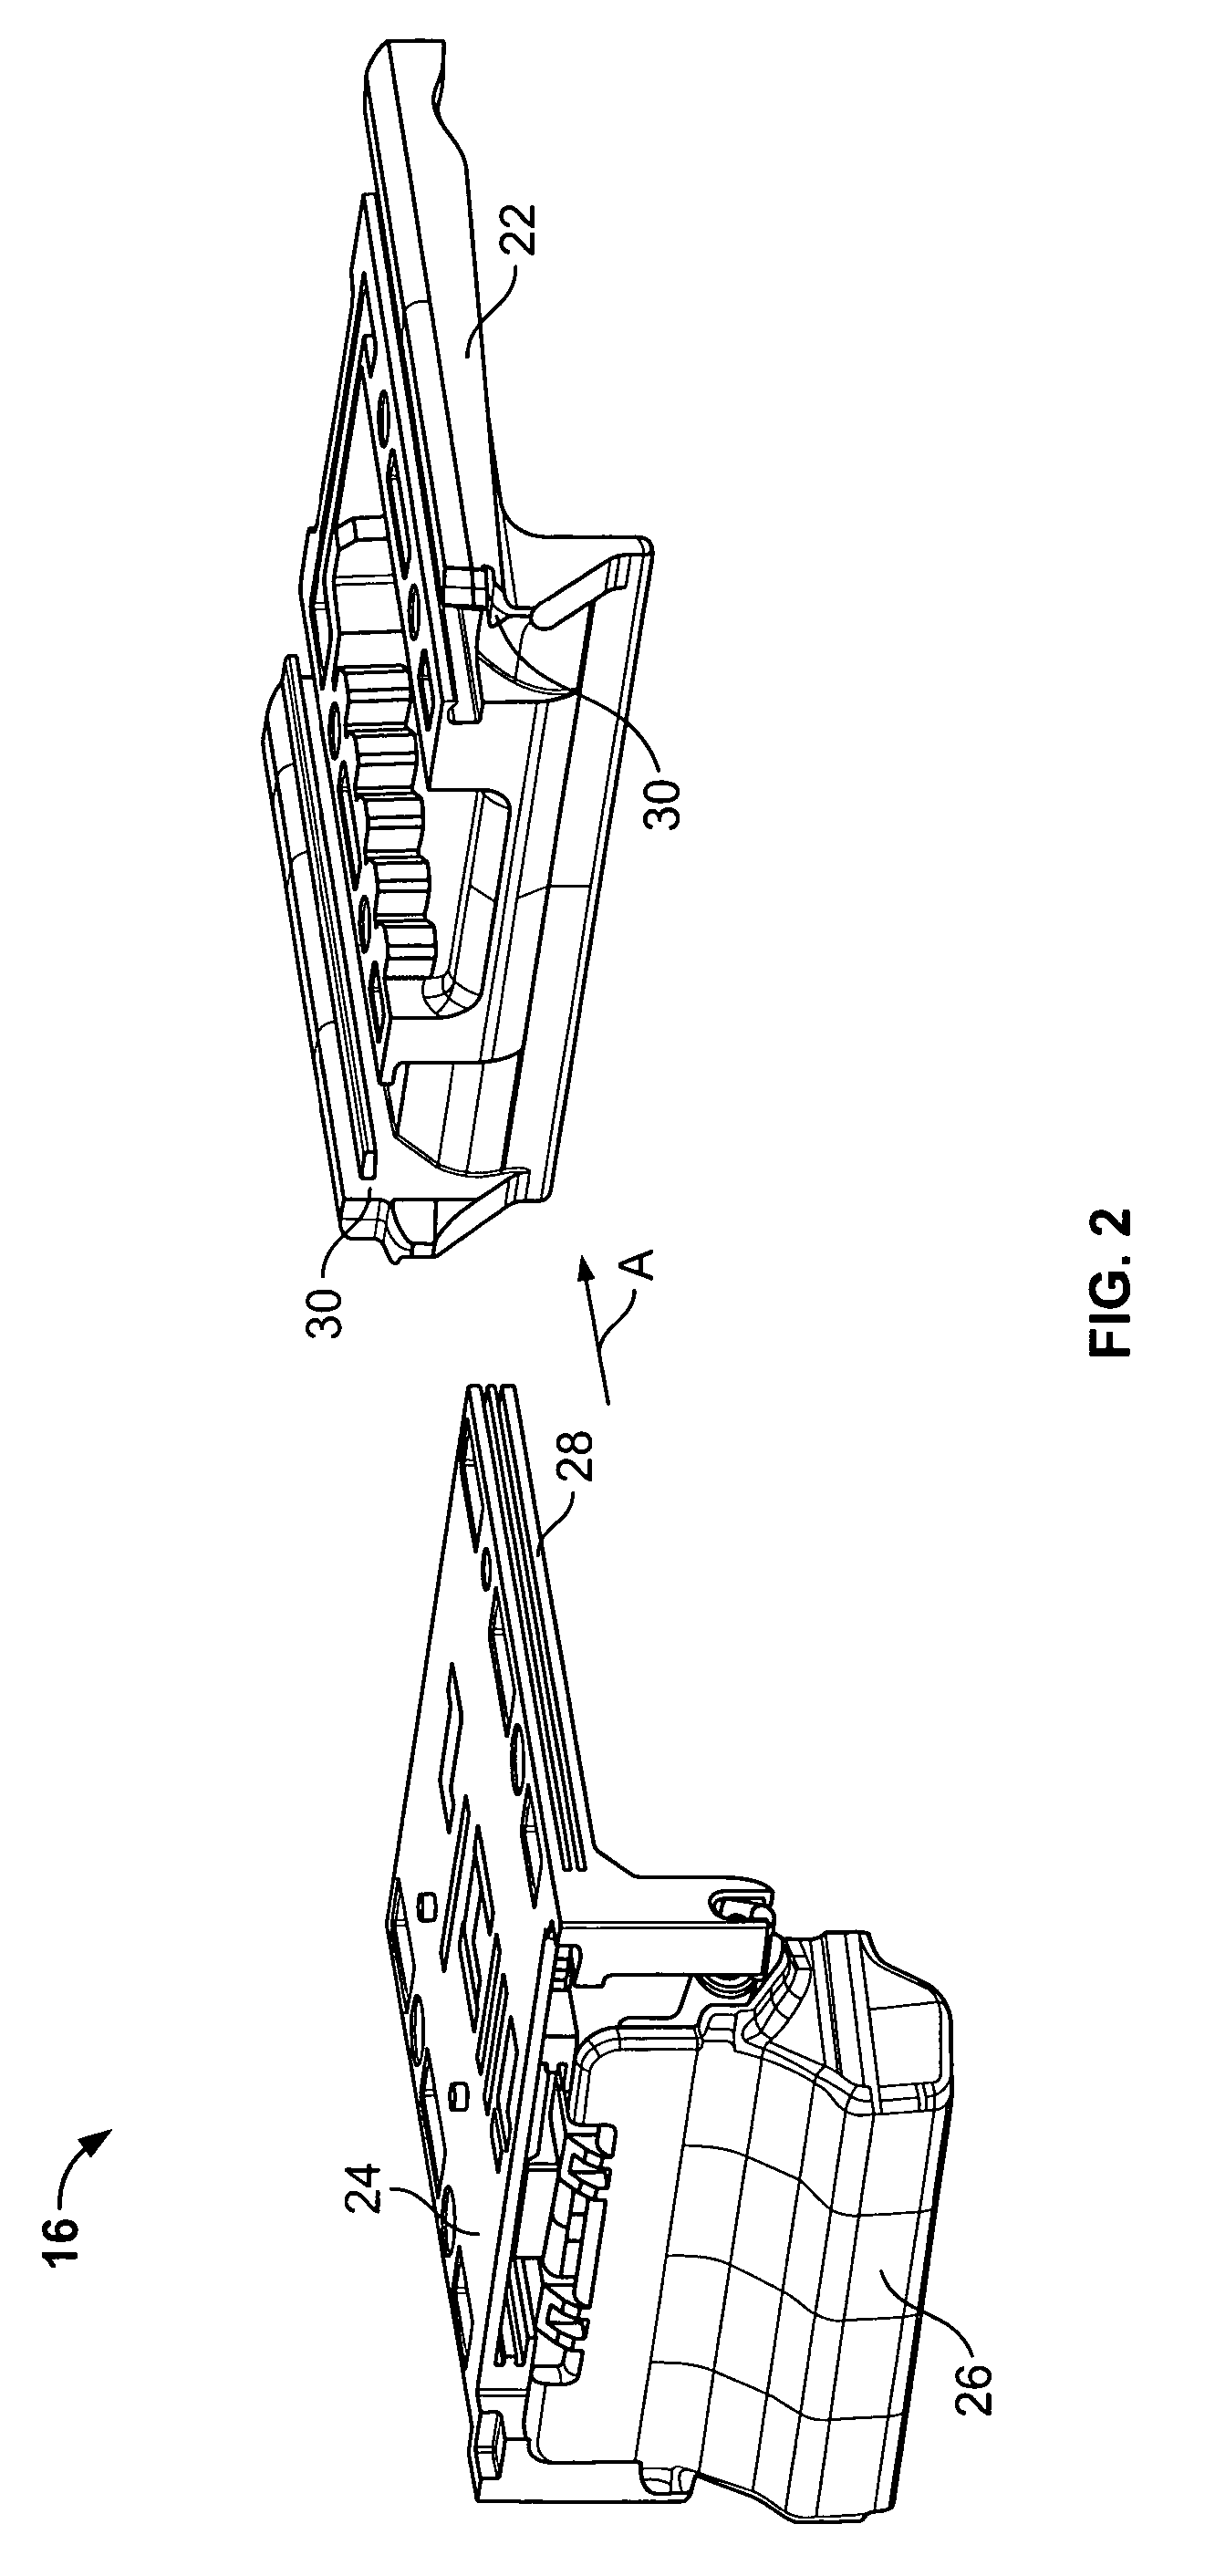 Thigh extension system for a vehicle seat